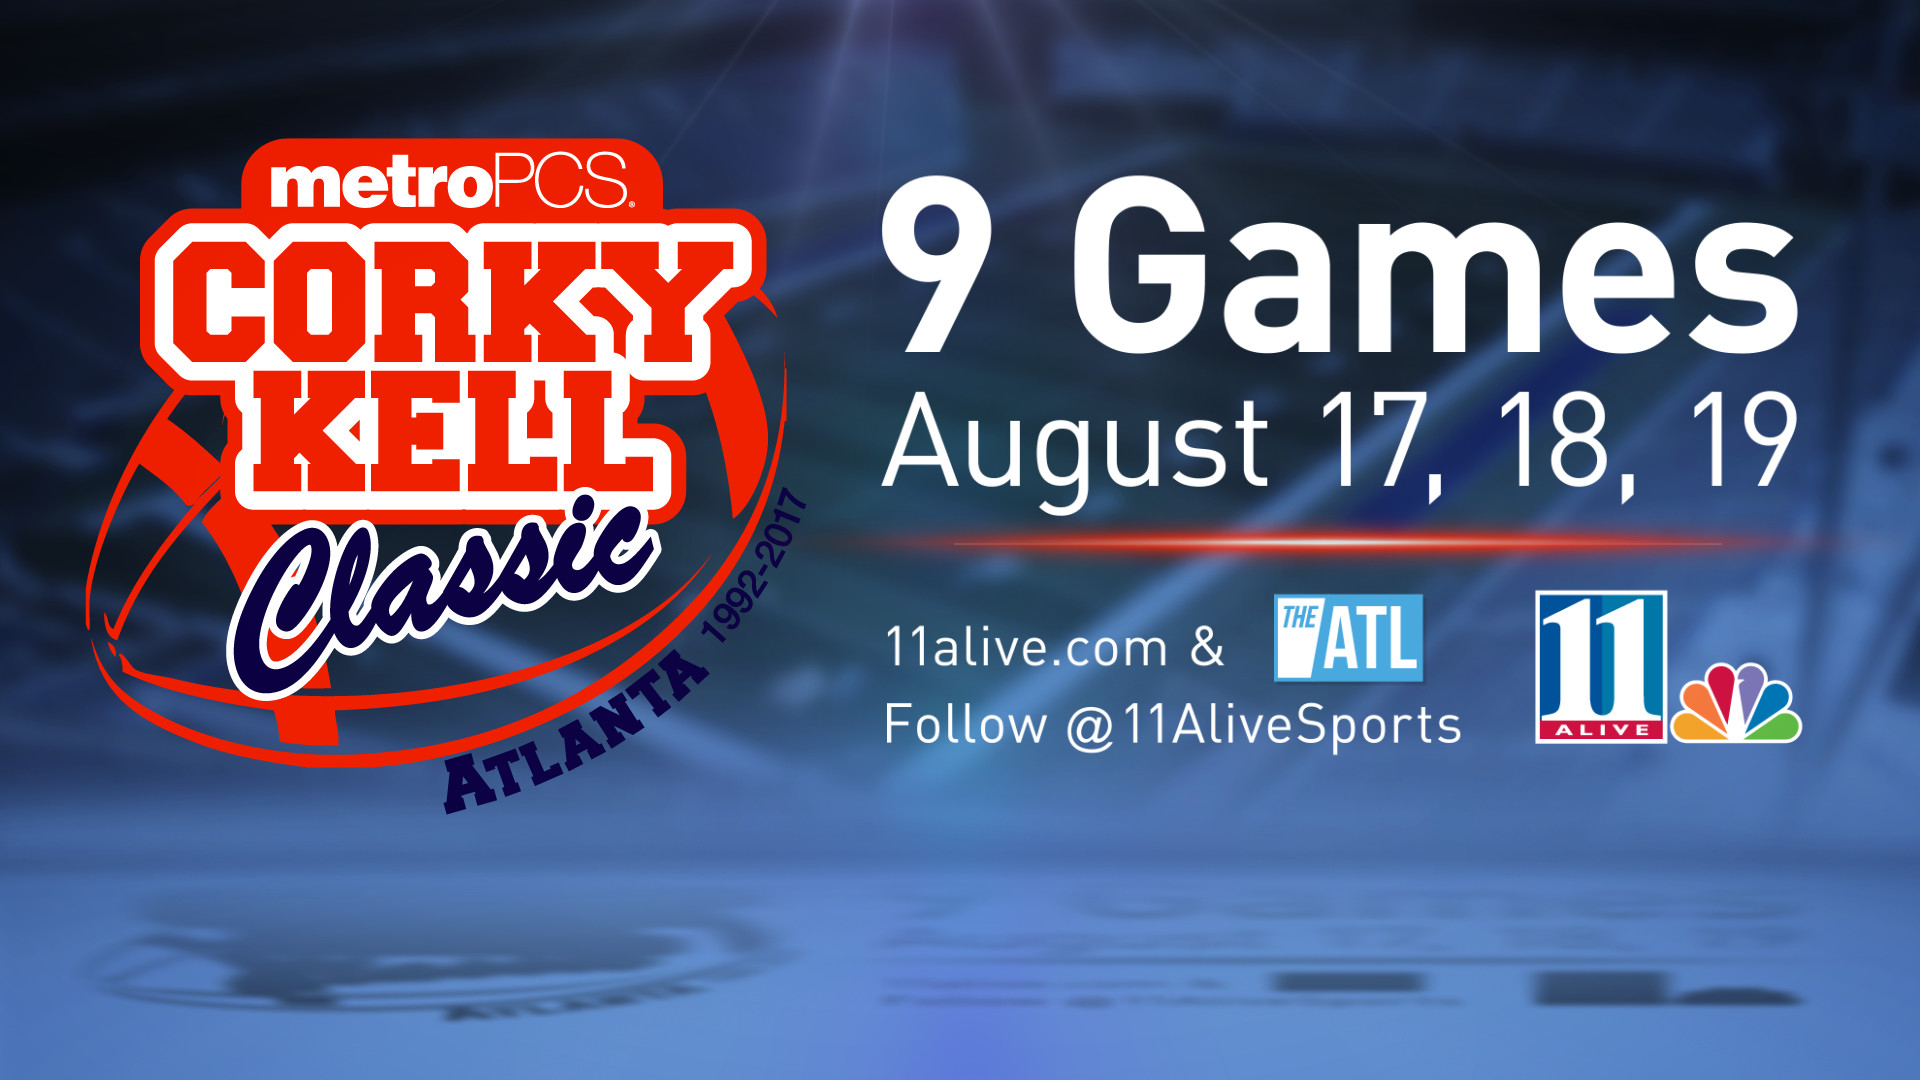 1920x1080 How to watch all nine games of the 2017 Corky Kell Classic | 11alive.com